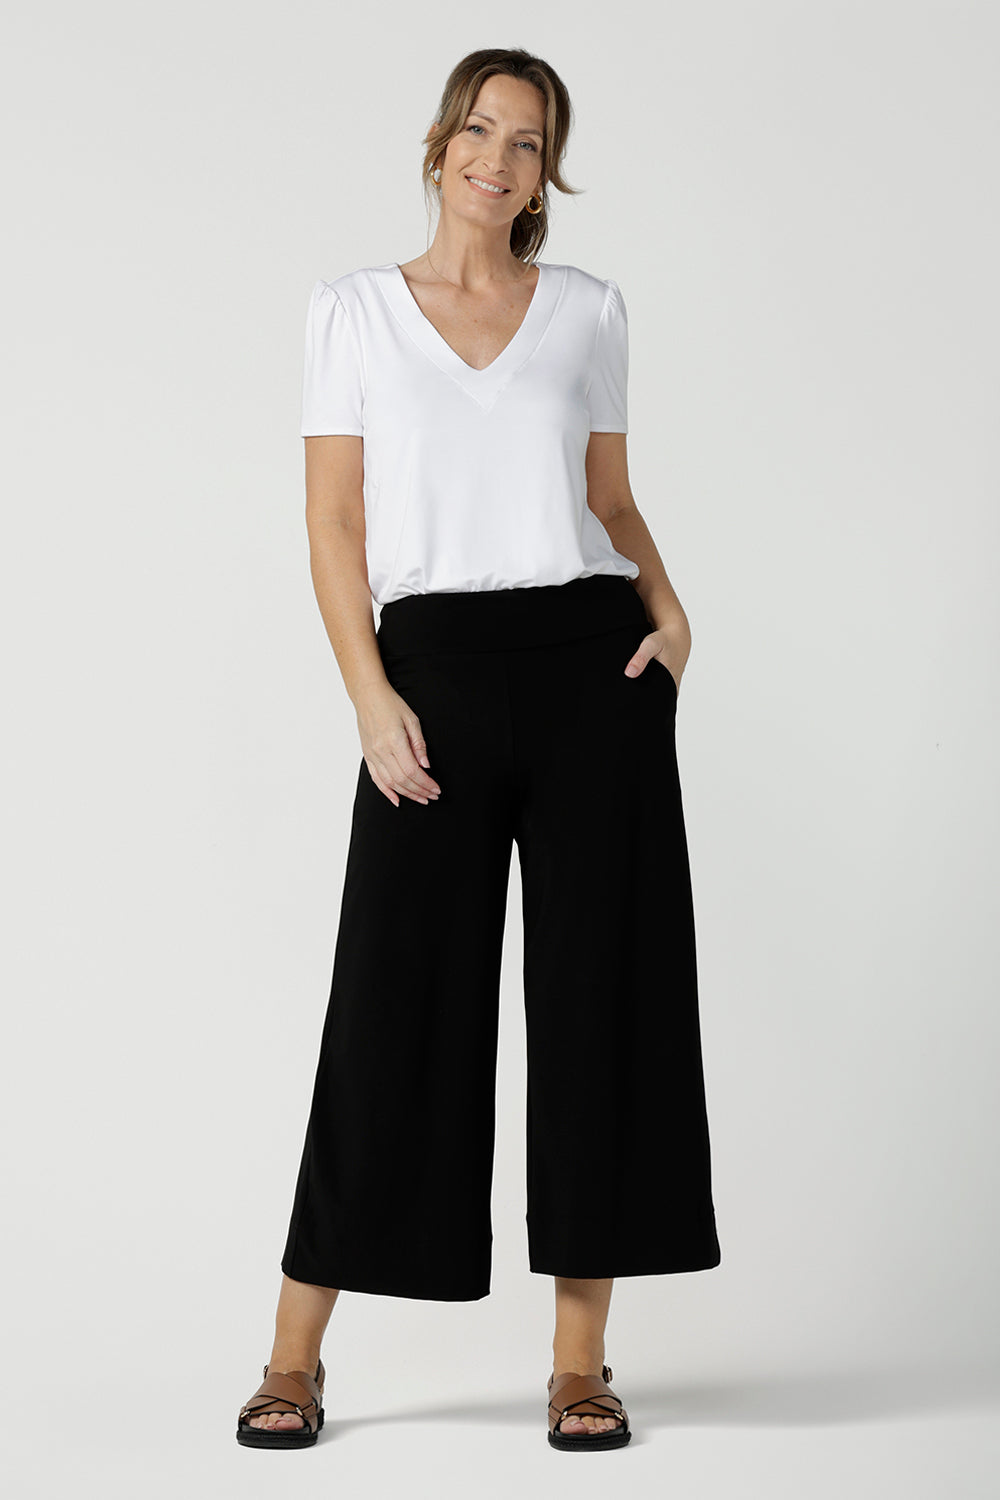 Comfortable, wide leg black culotte pants are worn with a V-neck white bamboo jersey top with short sleeves.. Cropped pants with pockets, these pull-on trousers are made in Australia by women's clothing brand, Leina & Fleur - size inclusive, shop online in petite, mid size and plus sizes.